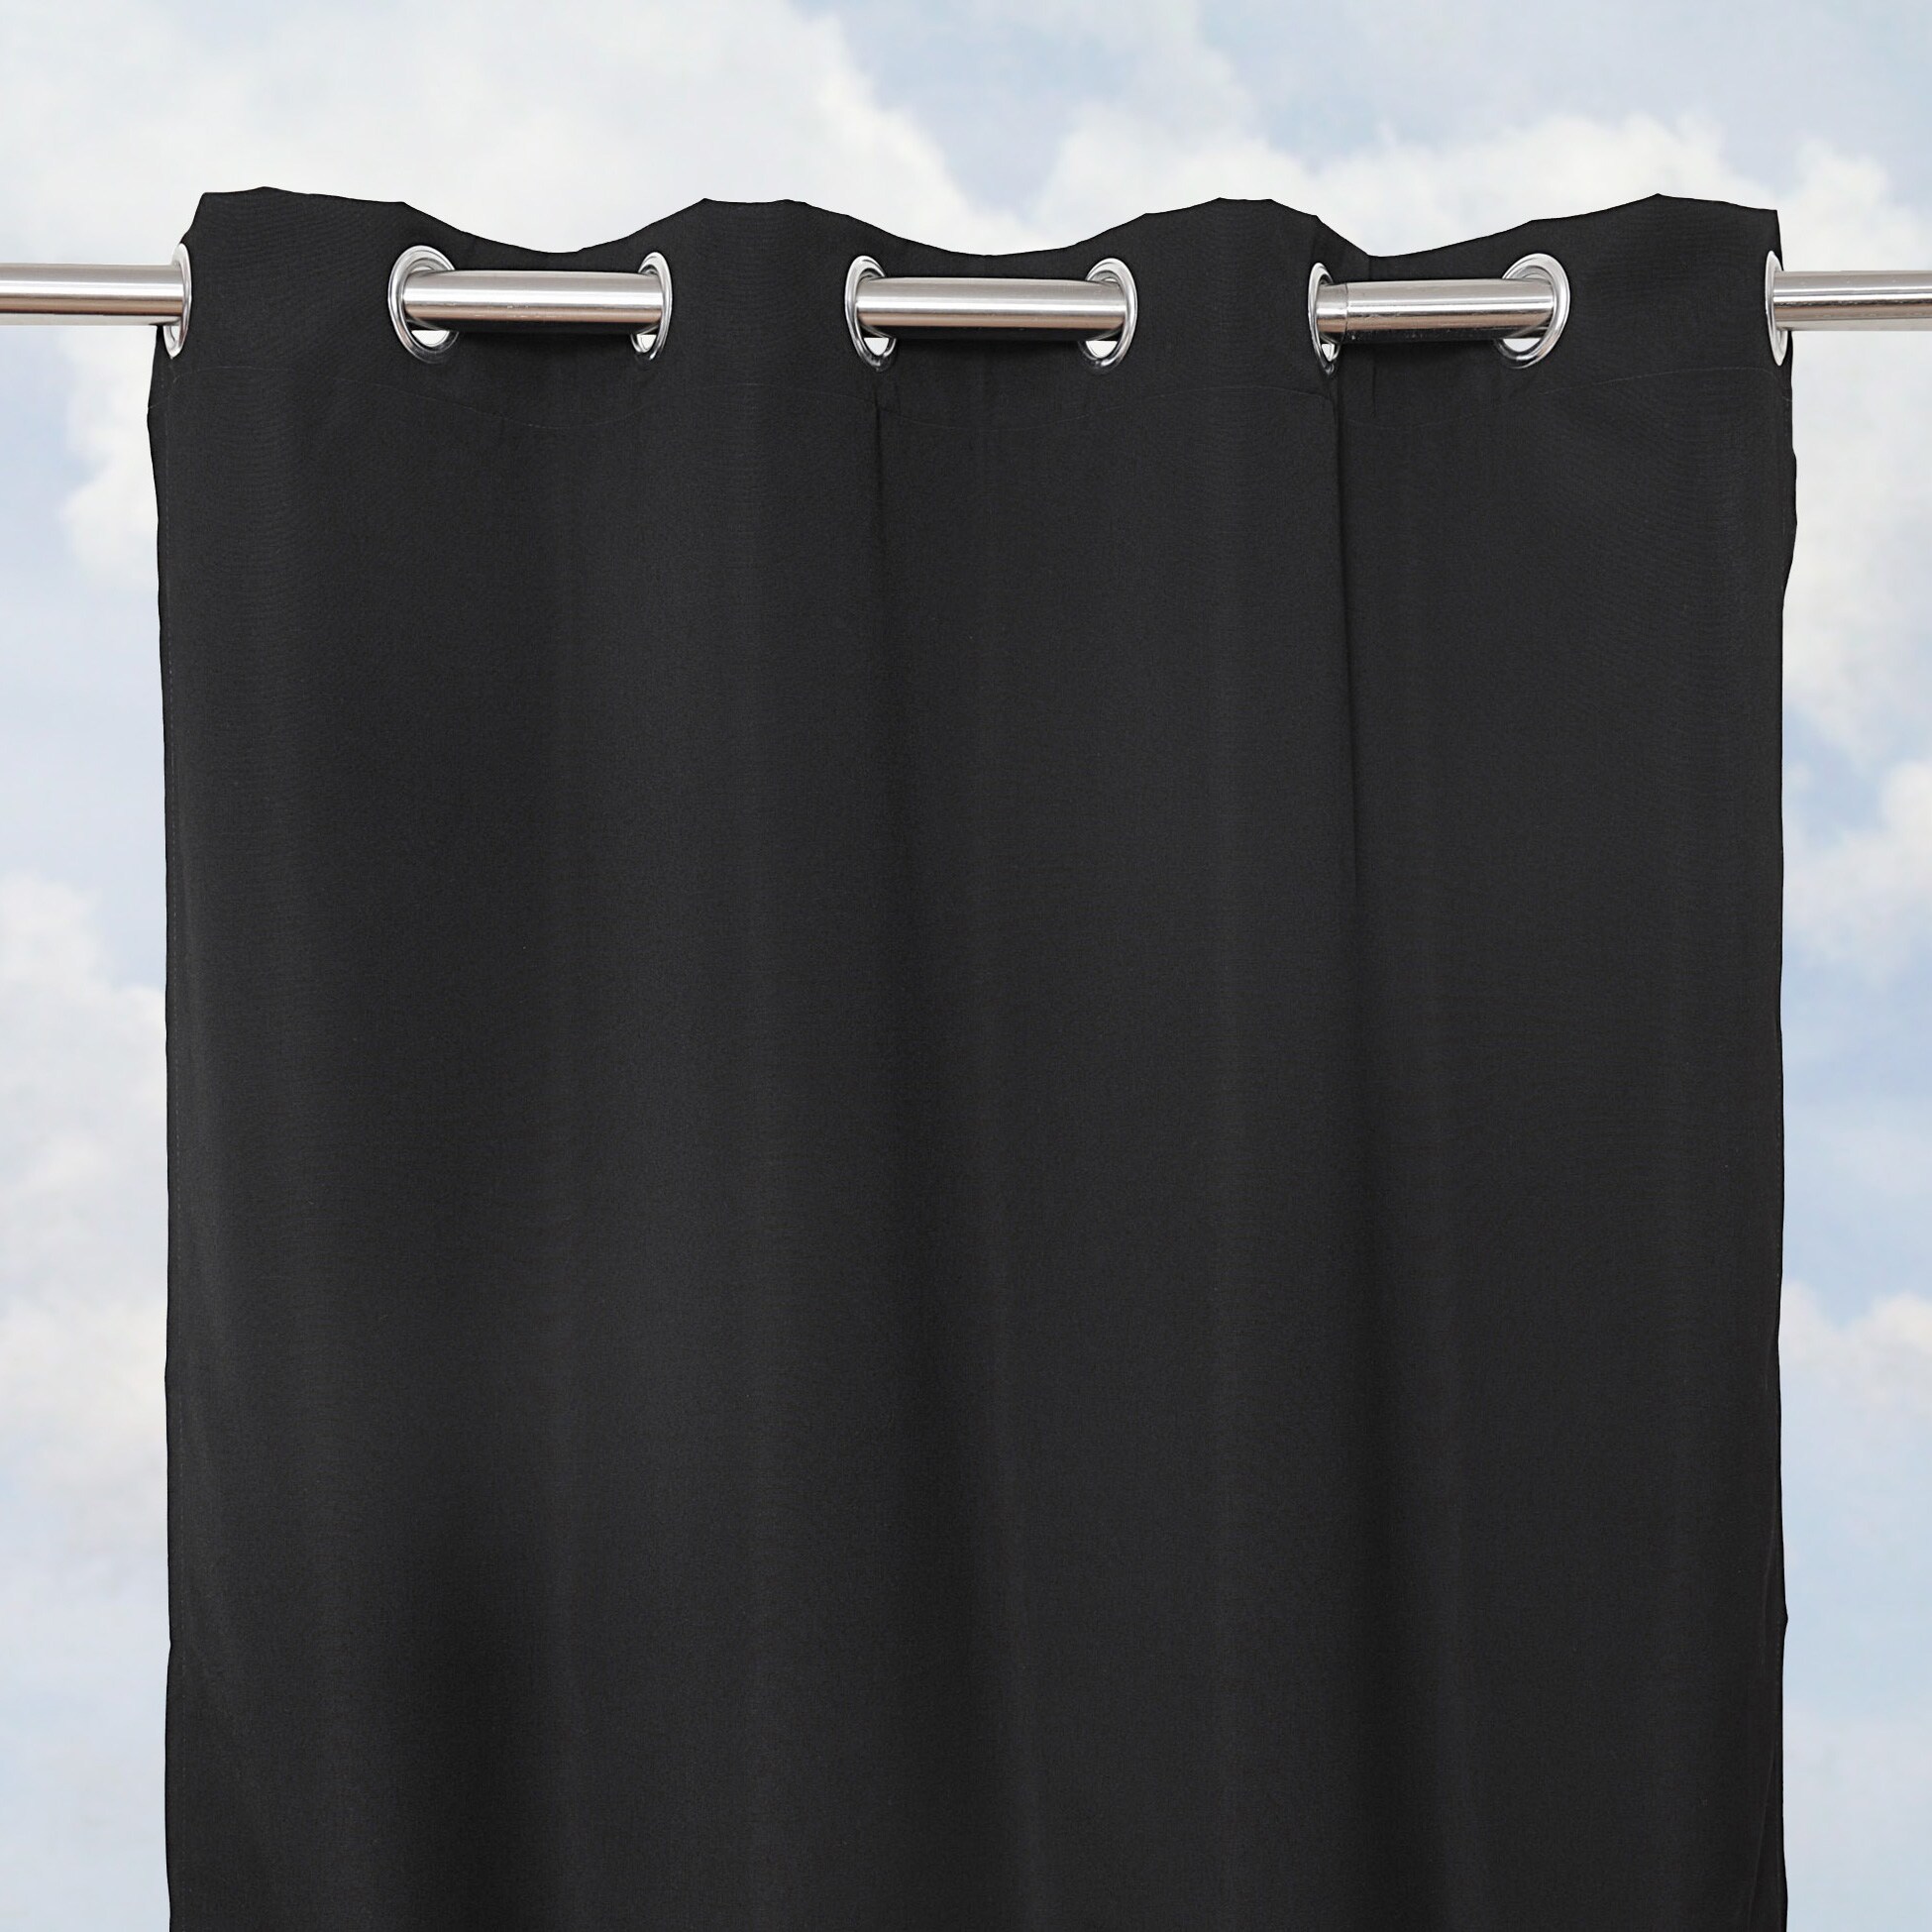 Sunbrella Bay View Black 84 inch Outdoor Curtain Panel (Black Materials Sunbrella FabricWeatherproof Dimensions 84 inches x 50 inchesWeight 2 pounds  )